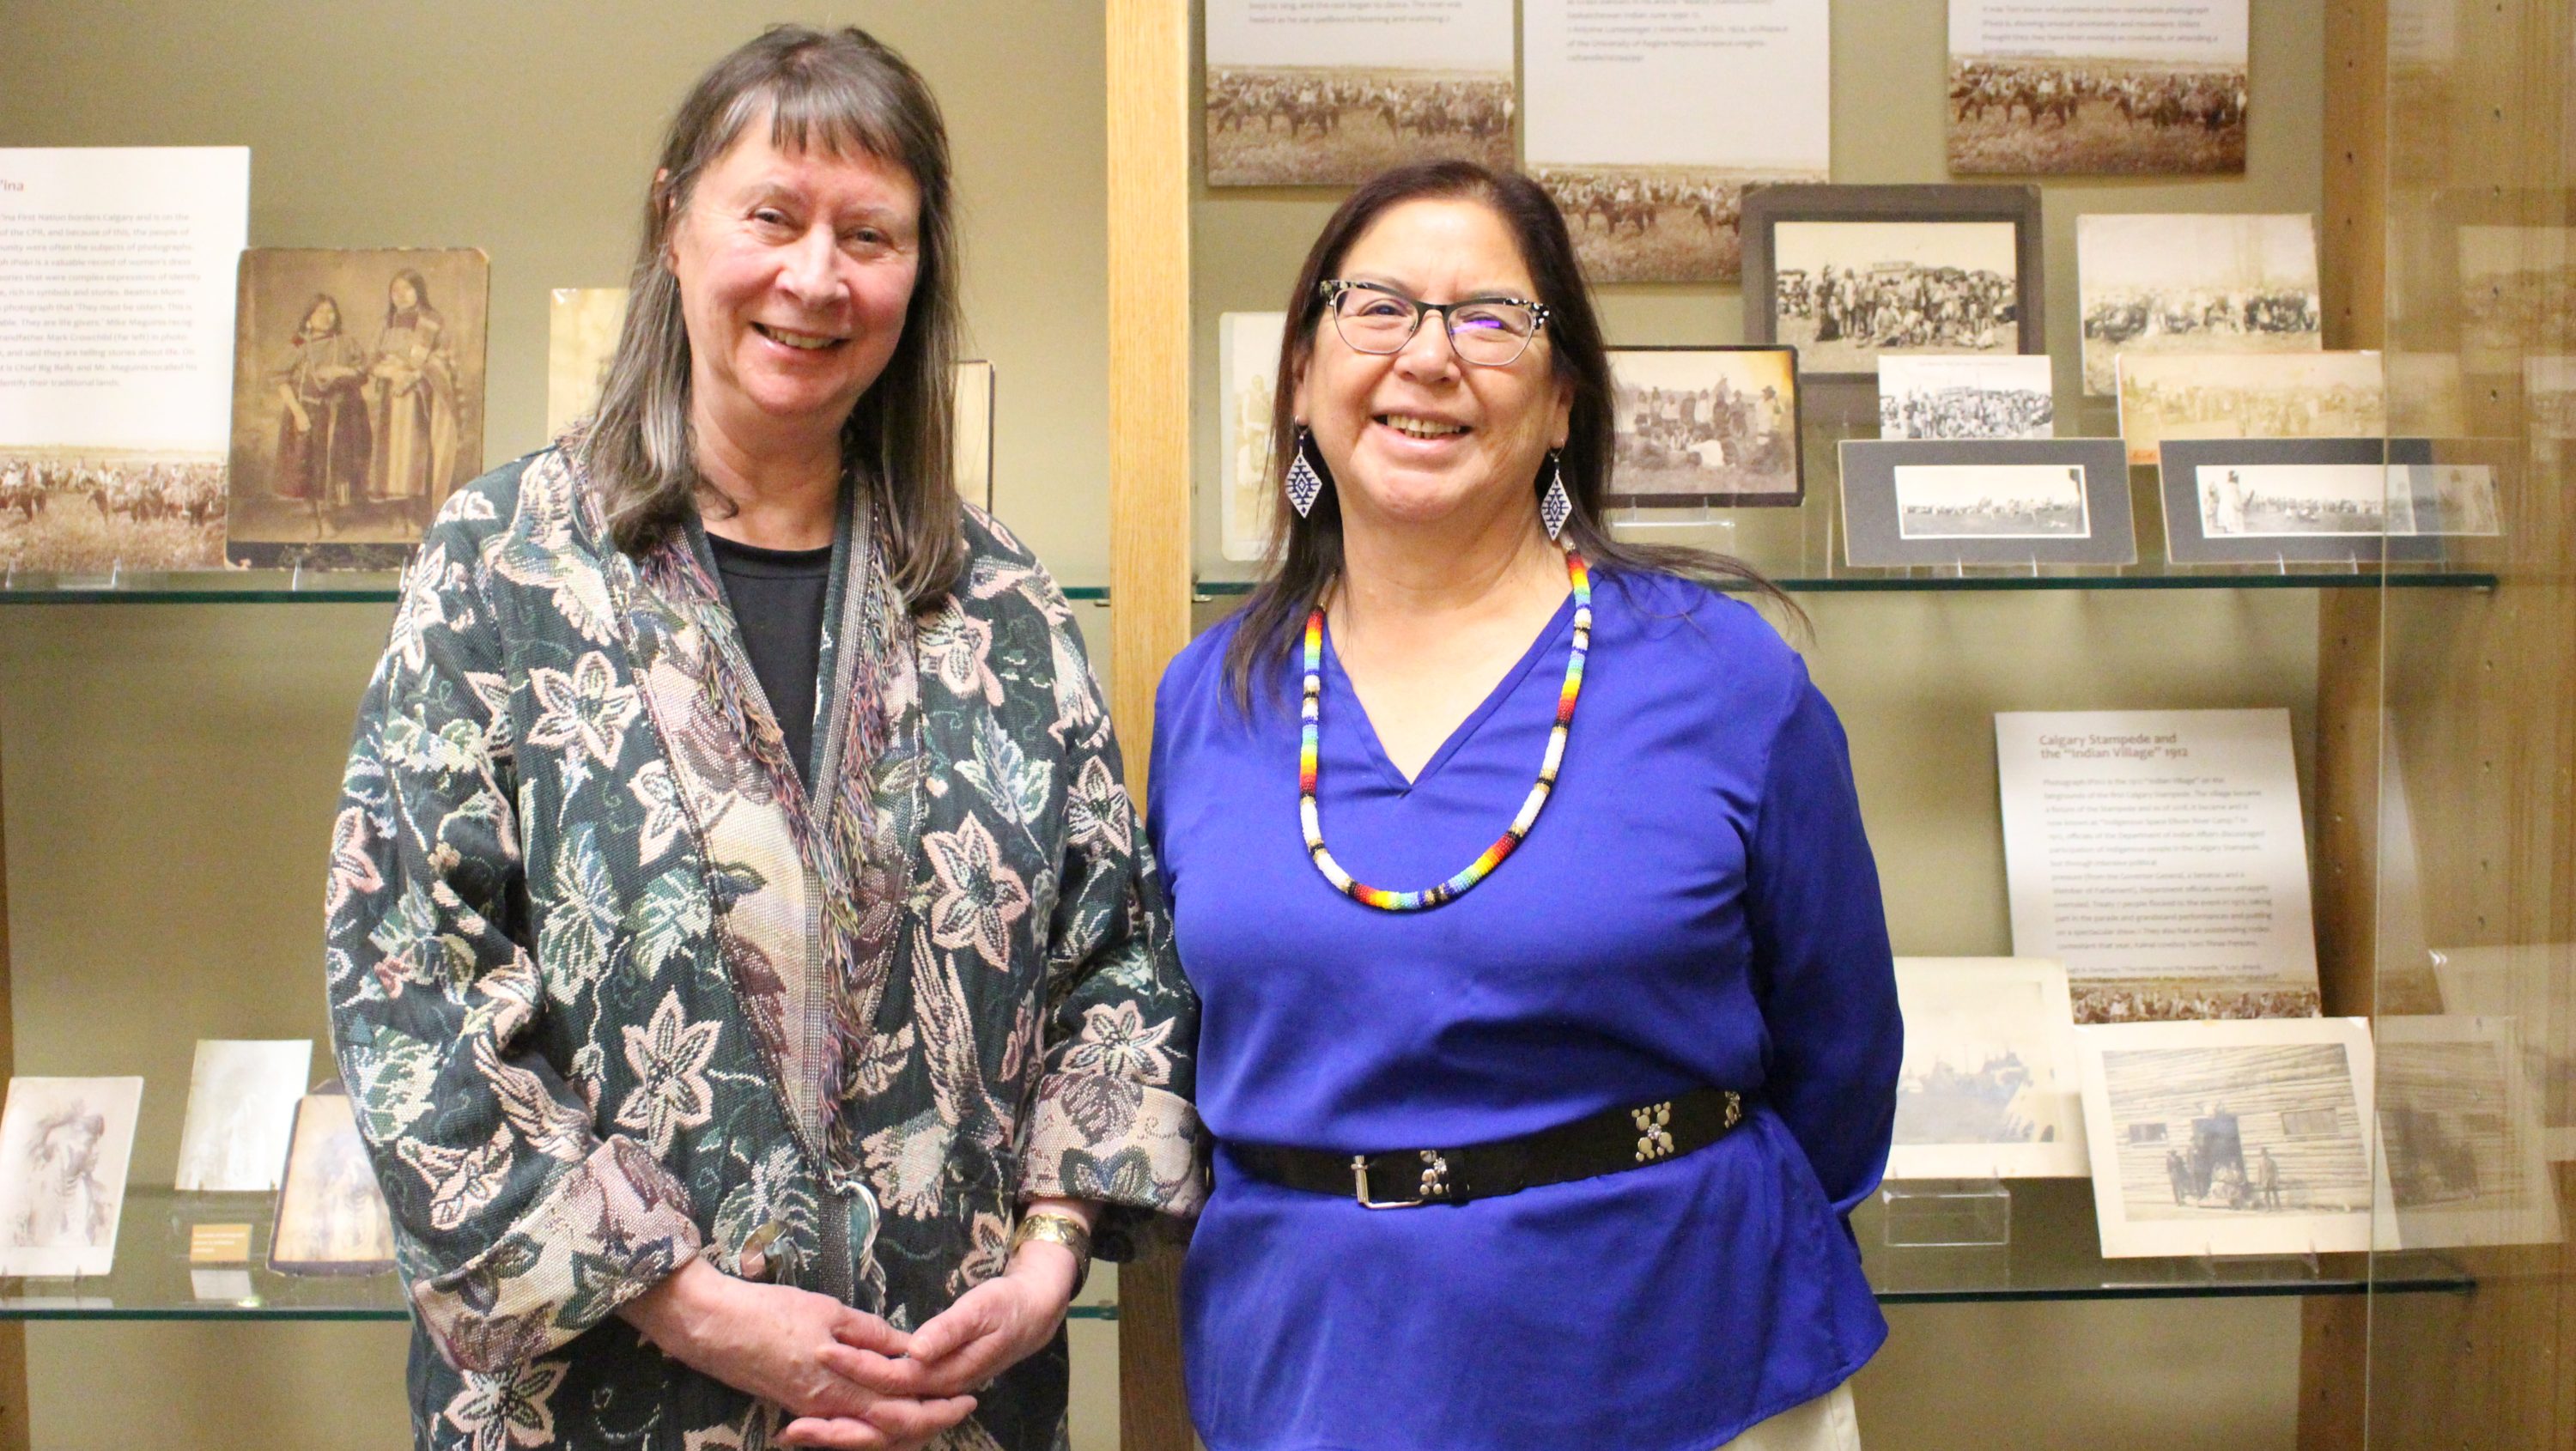 Researchers Sarah Carter (left) and Inez Lightning are co-curators of “Ancestors,” an exhibition of historic photographs and stories that shed light on the lives and cultures of Indigenous peoples in Western Canada. 